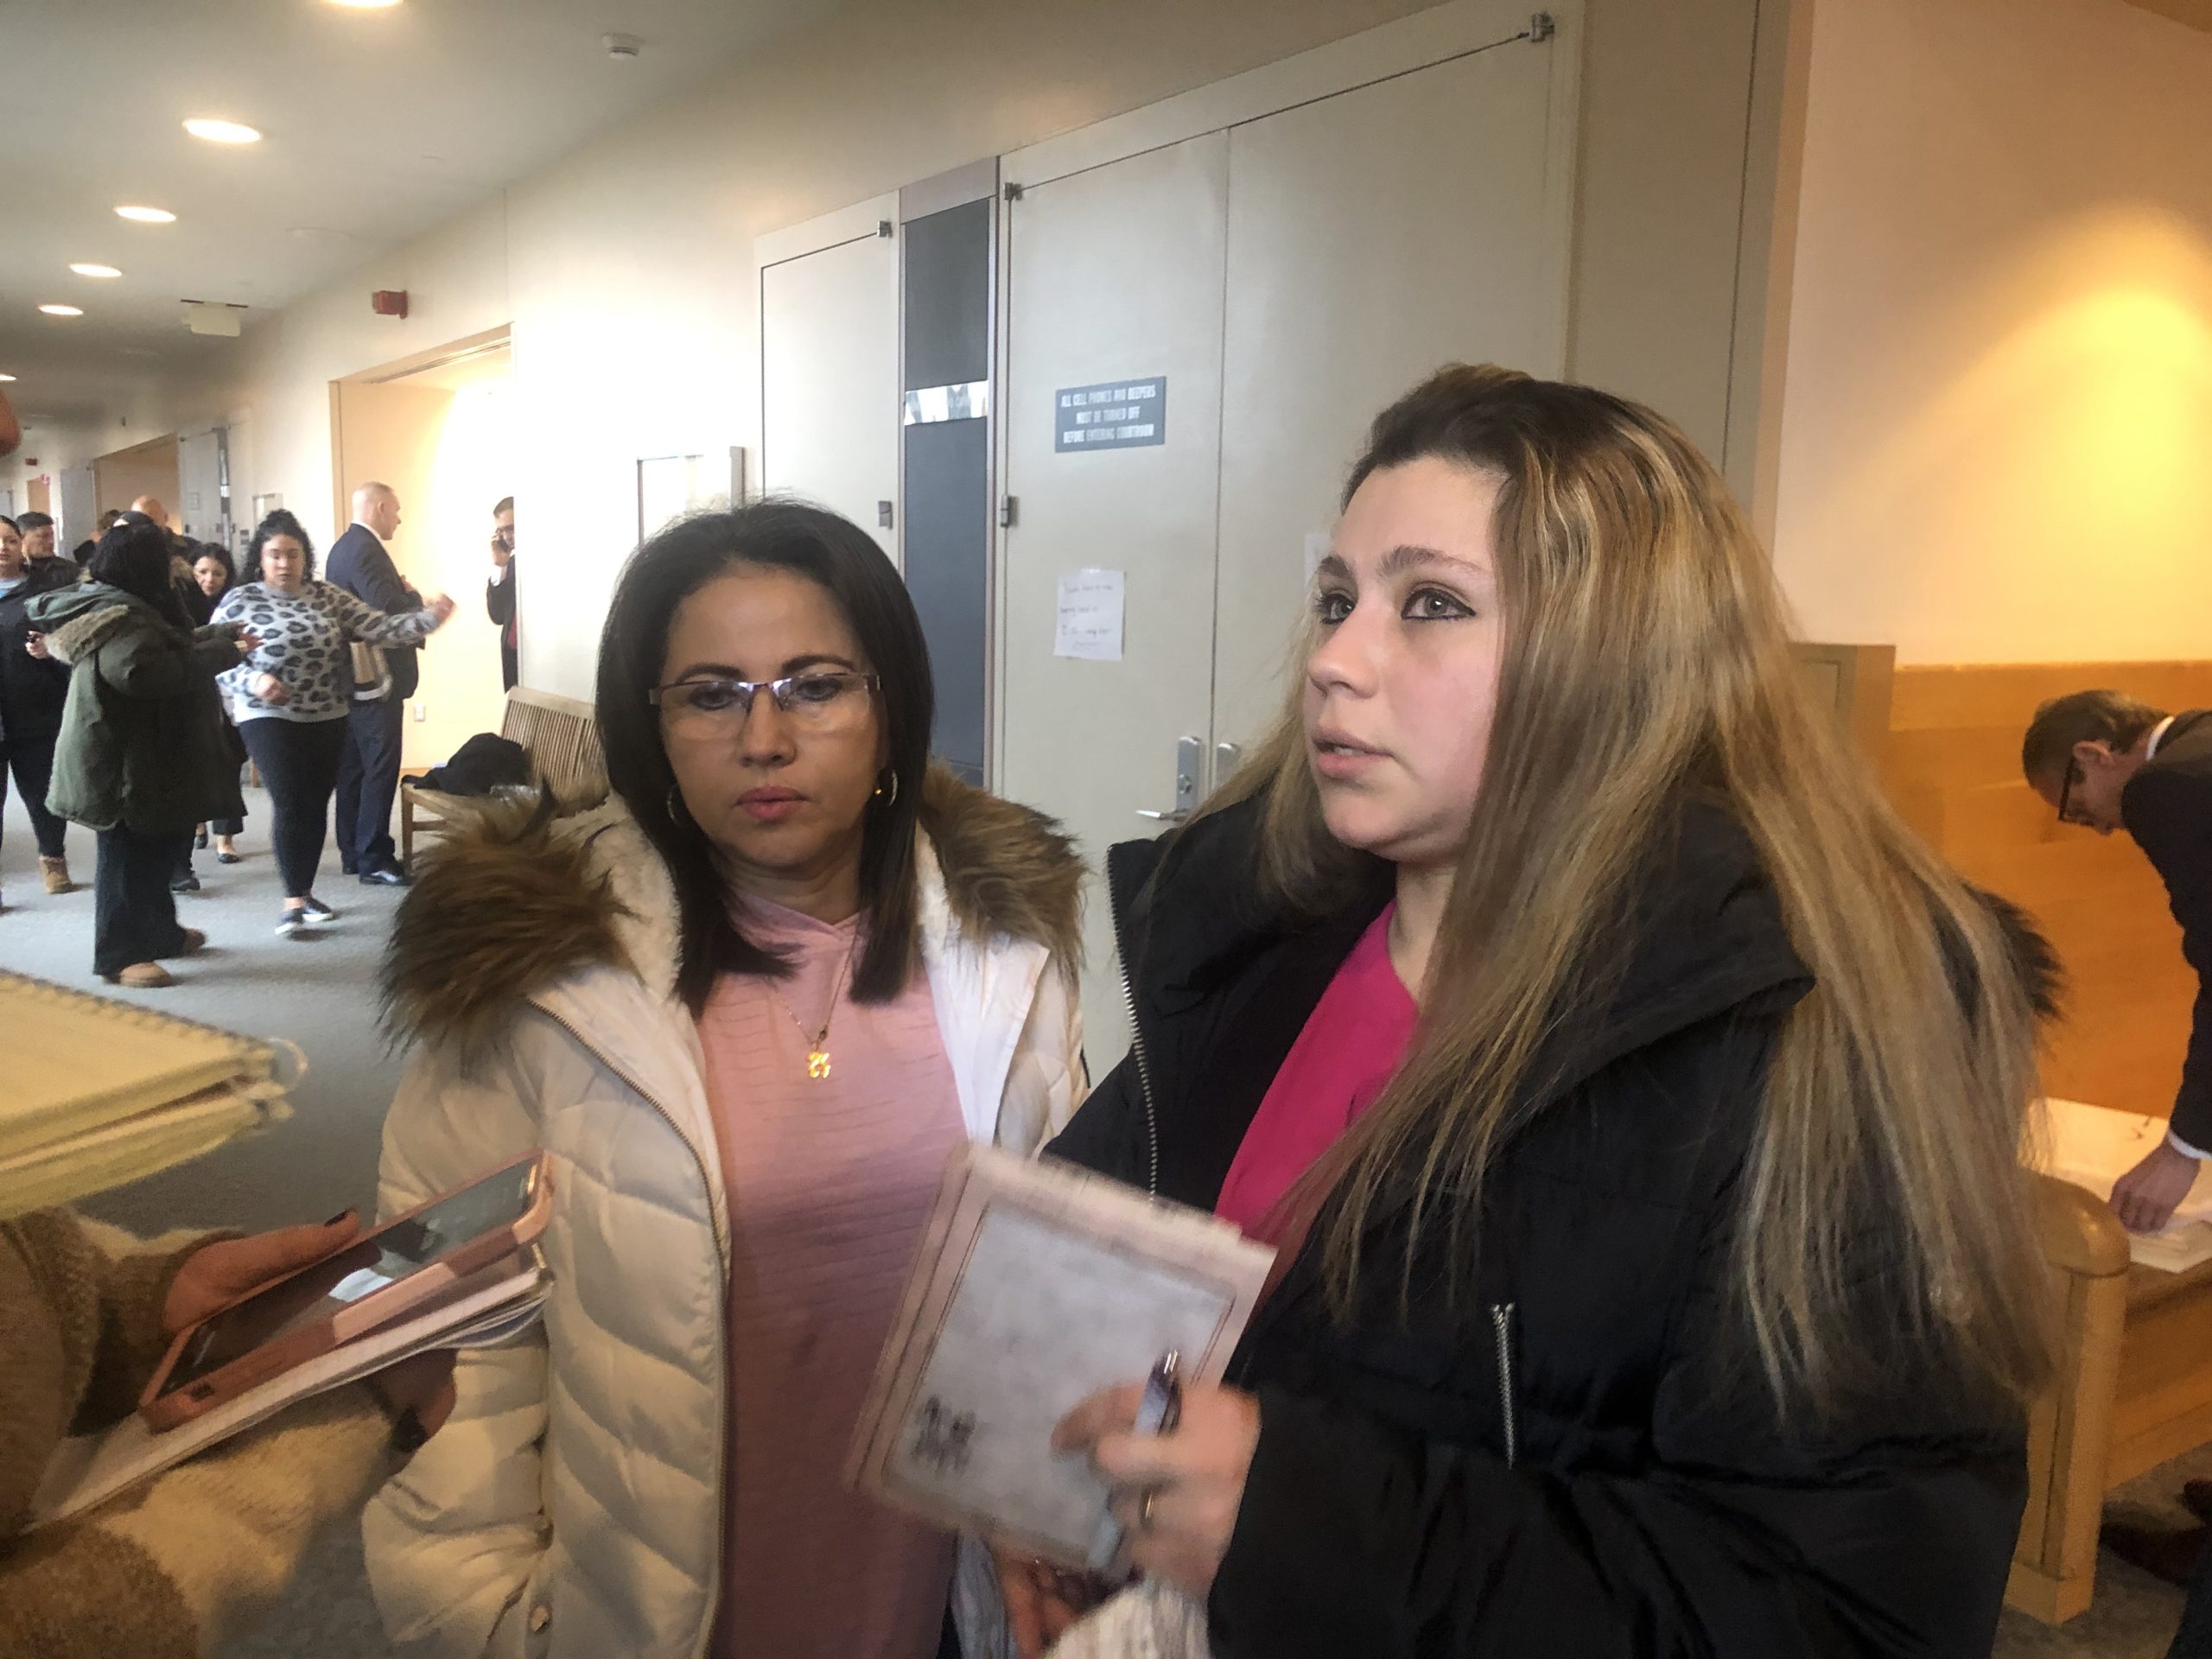 Mr. Usma Quintero's cousin Jennifer Cano and her mother Mercedes Giraldo were in court on Monday with an attorney hired to represent Mr. Usma Quintero's family in an expected civil suit against Ms. Rooney. 